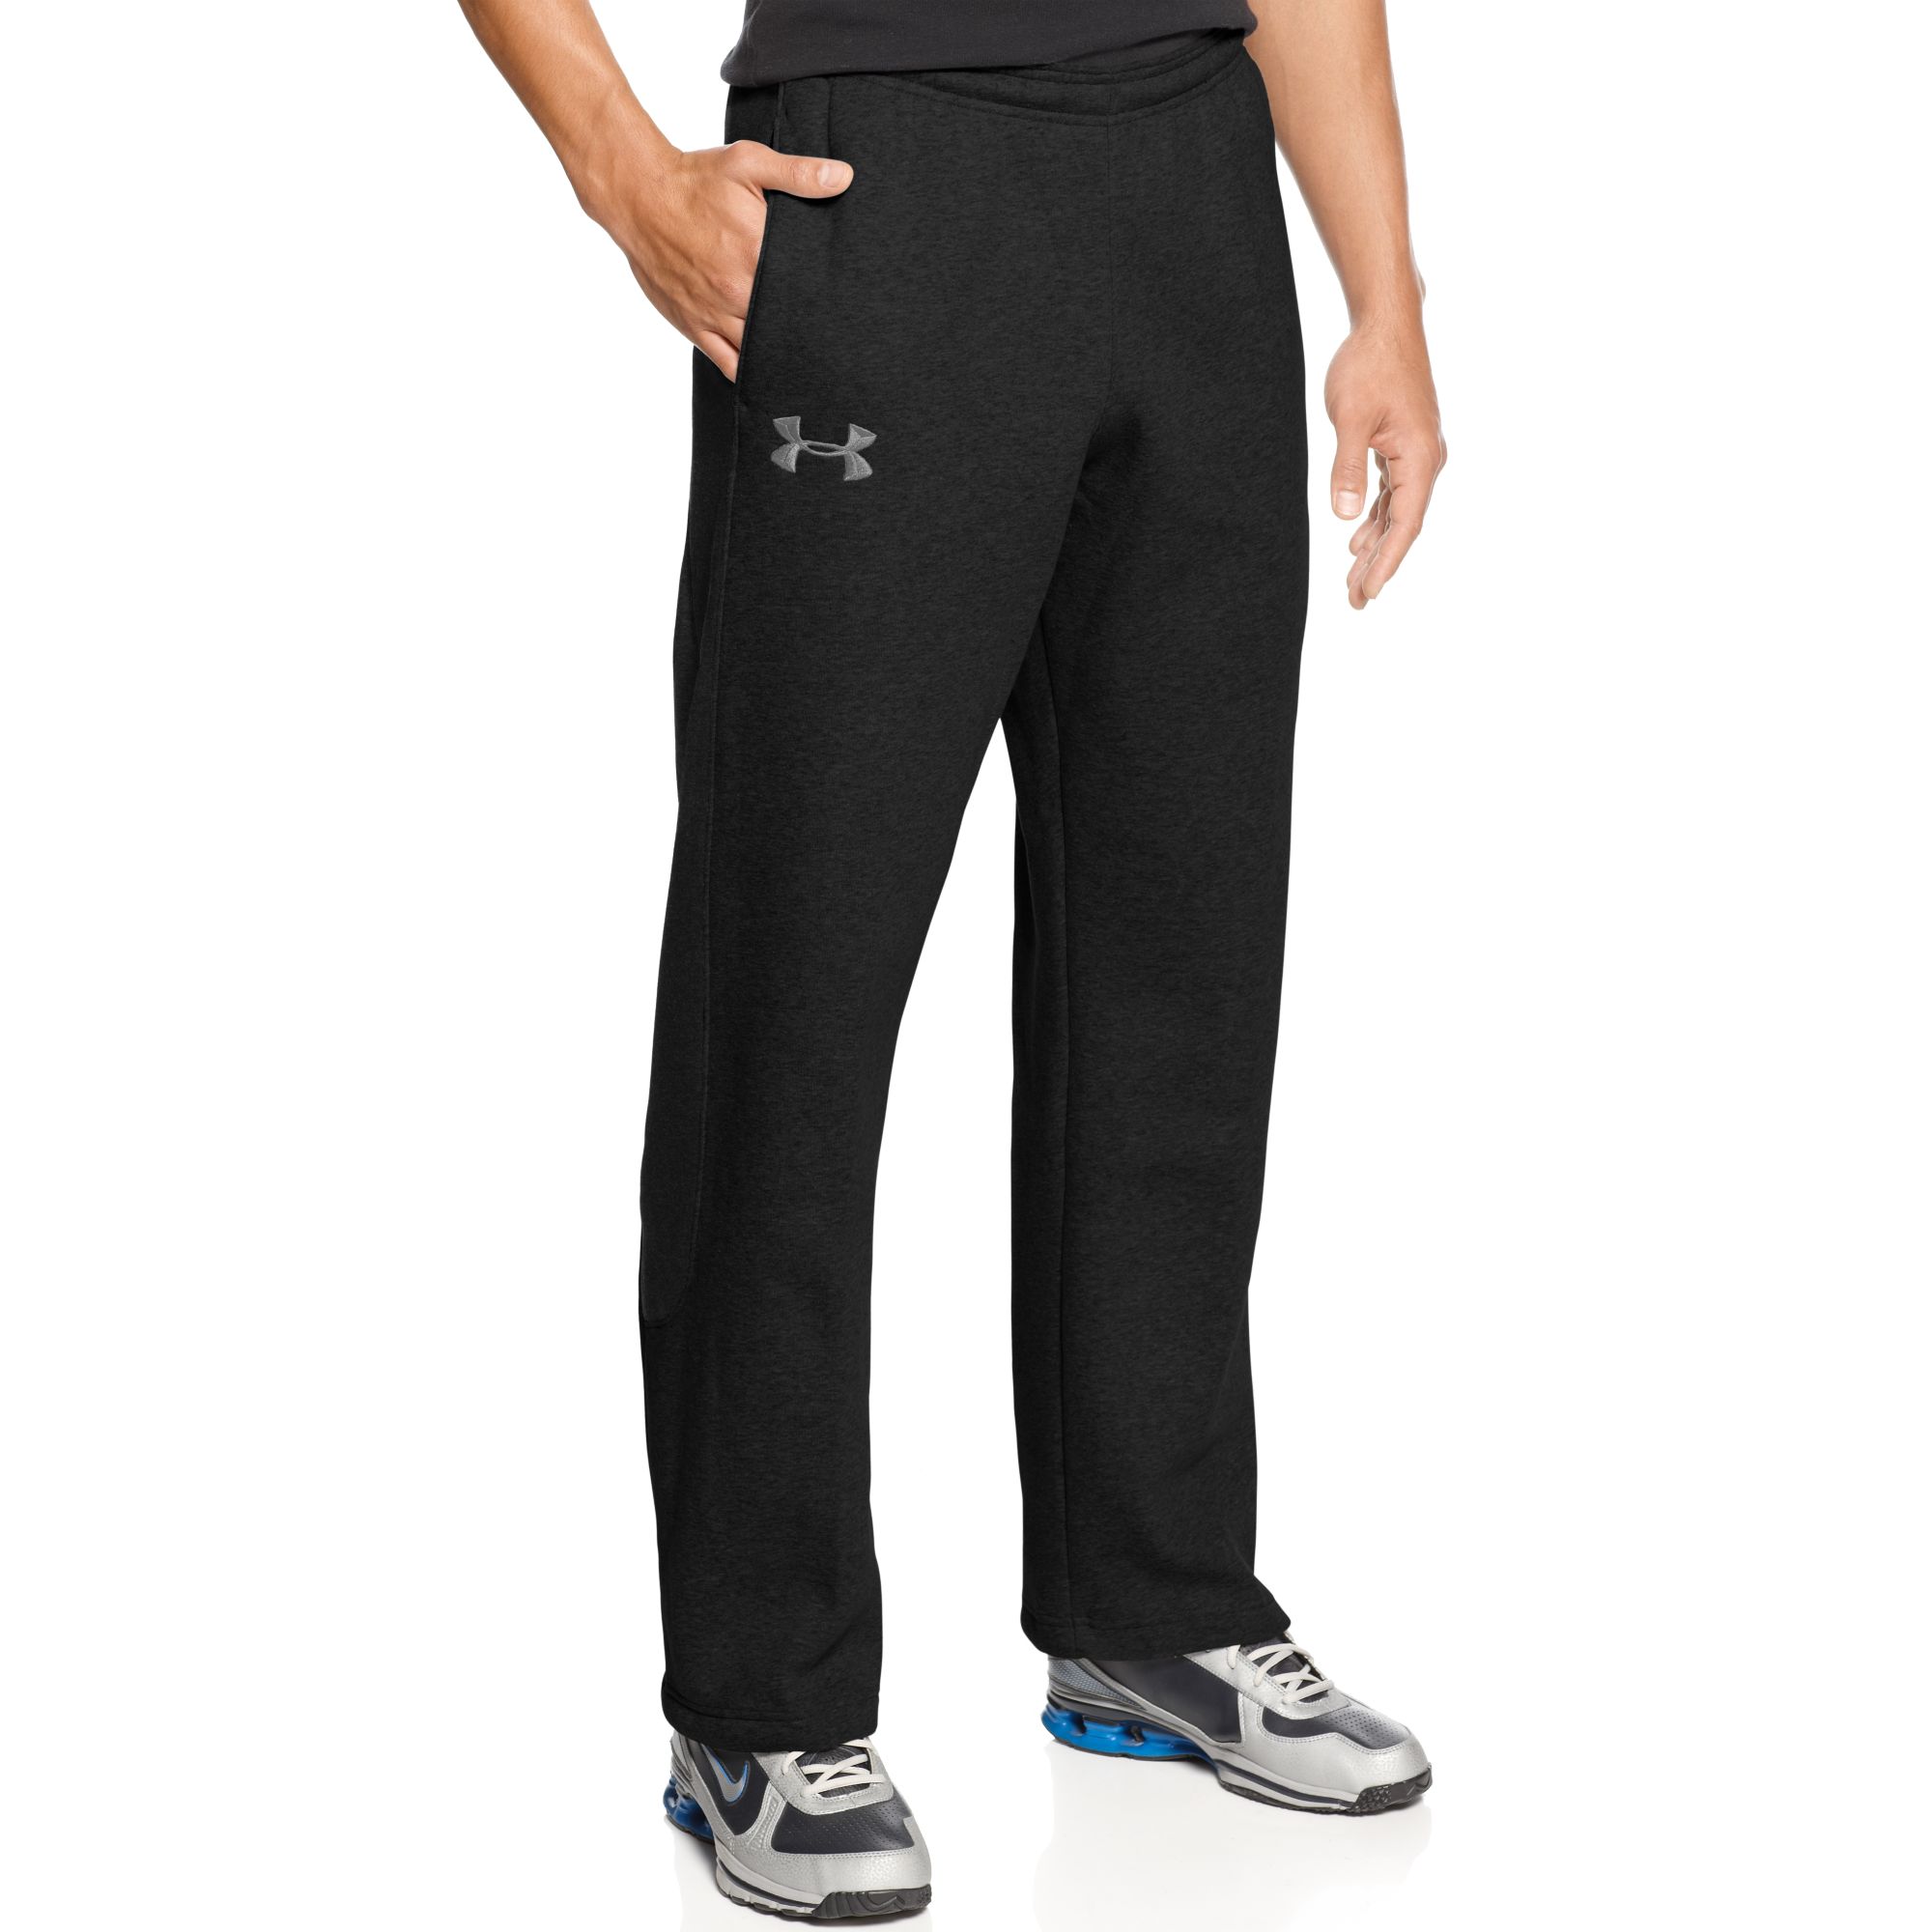 Lyst - Under armour Water Repellant Storm Pants in Black for Men